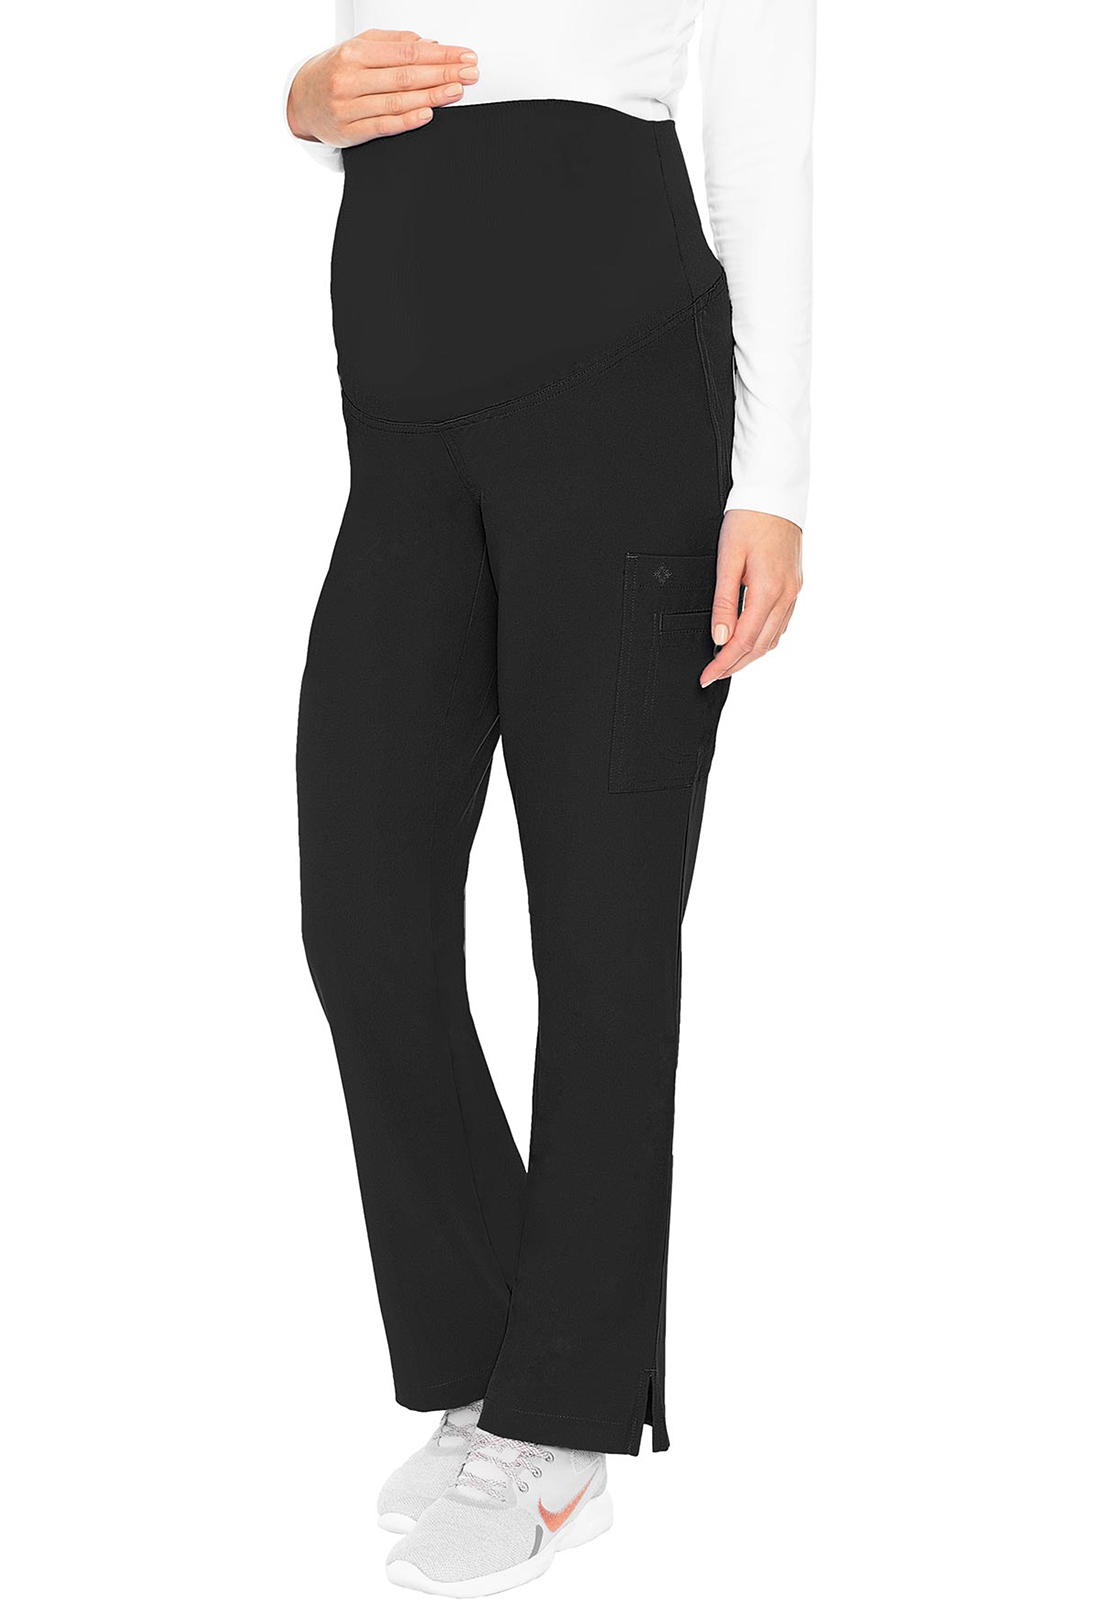 Med Couture MC Maternity Maternity Pant-